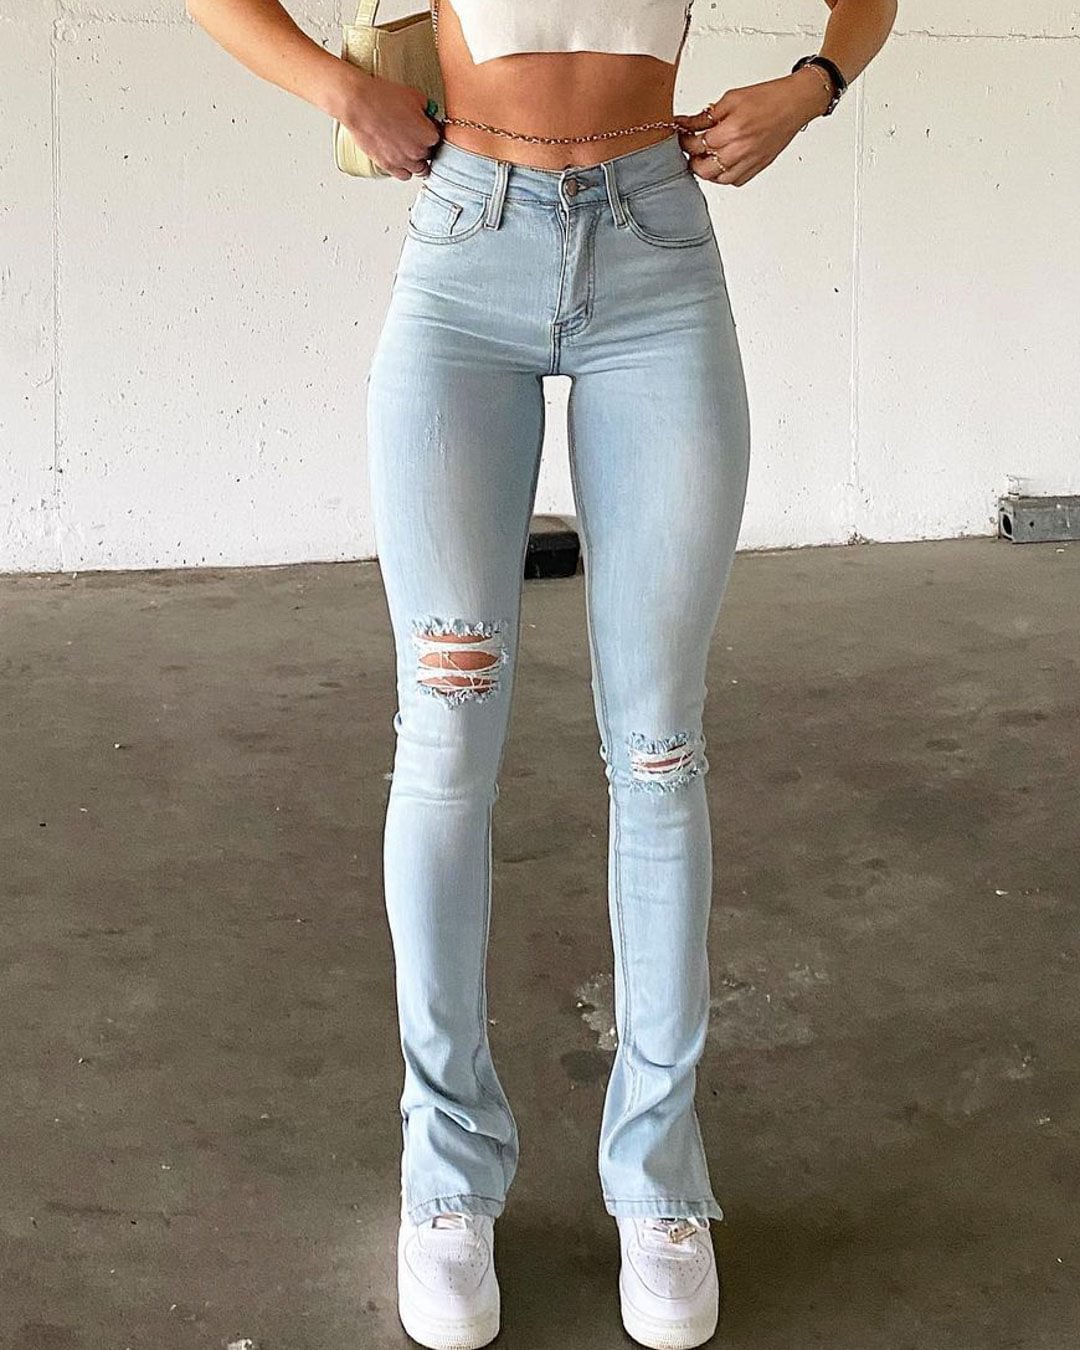 Fashionv-Distressed Washed Ripped Jeans